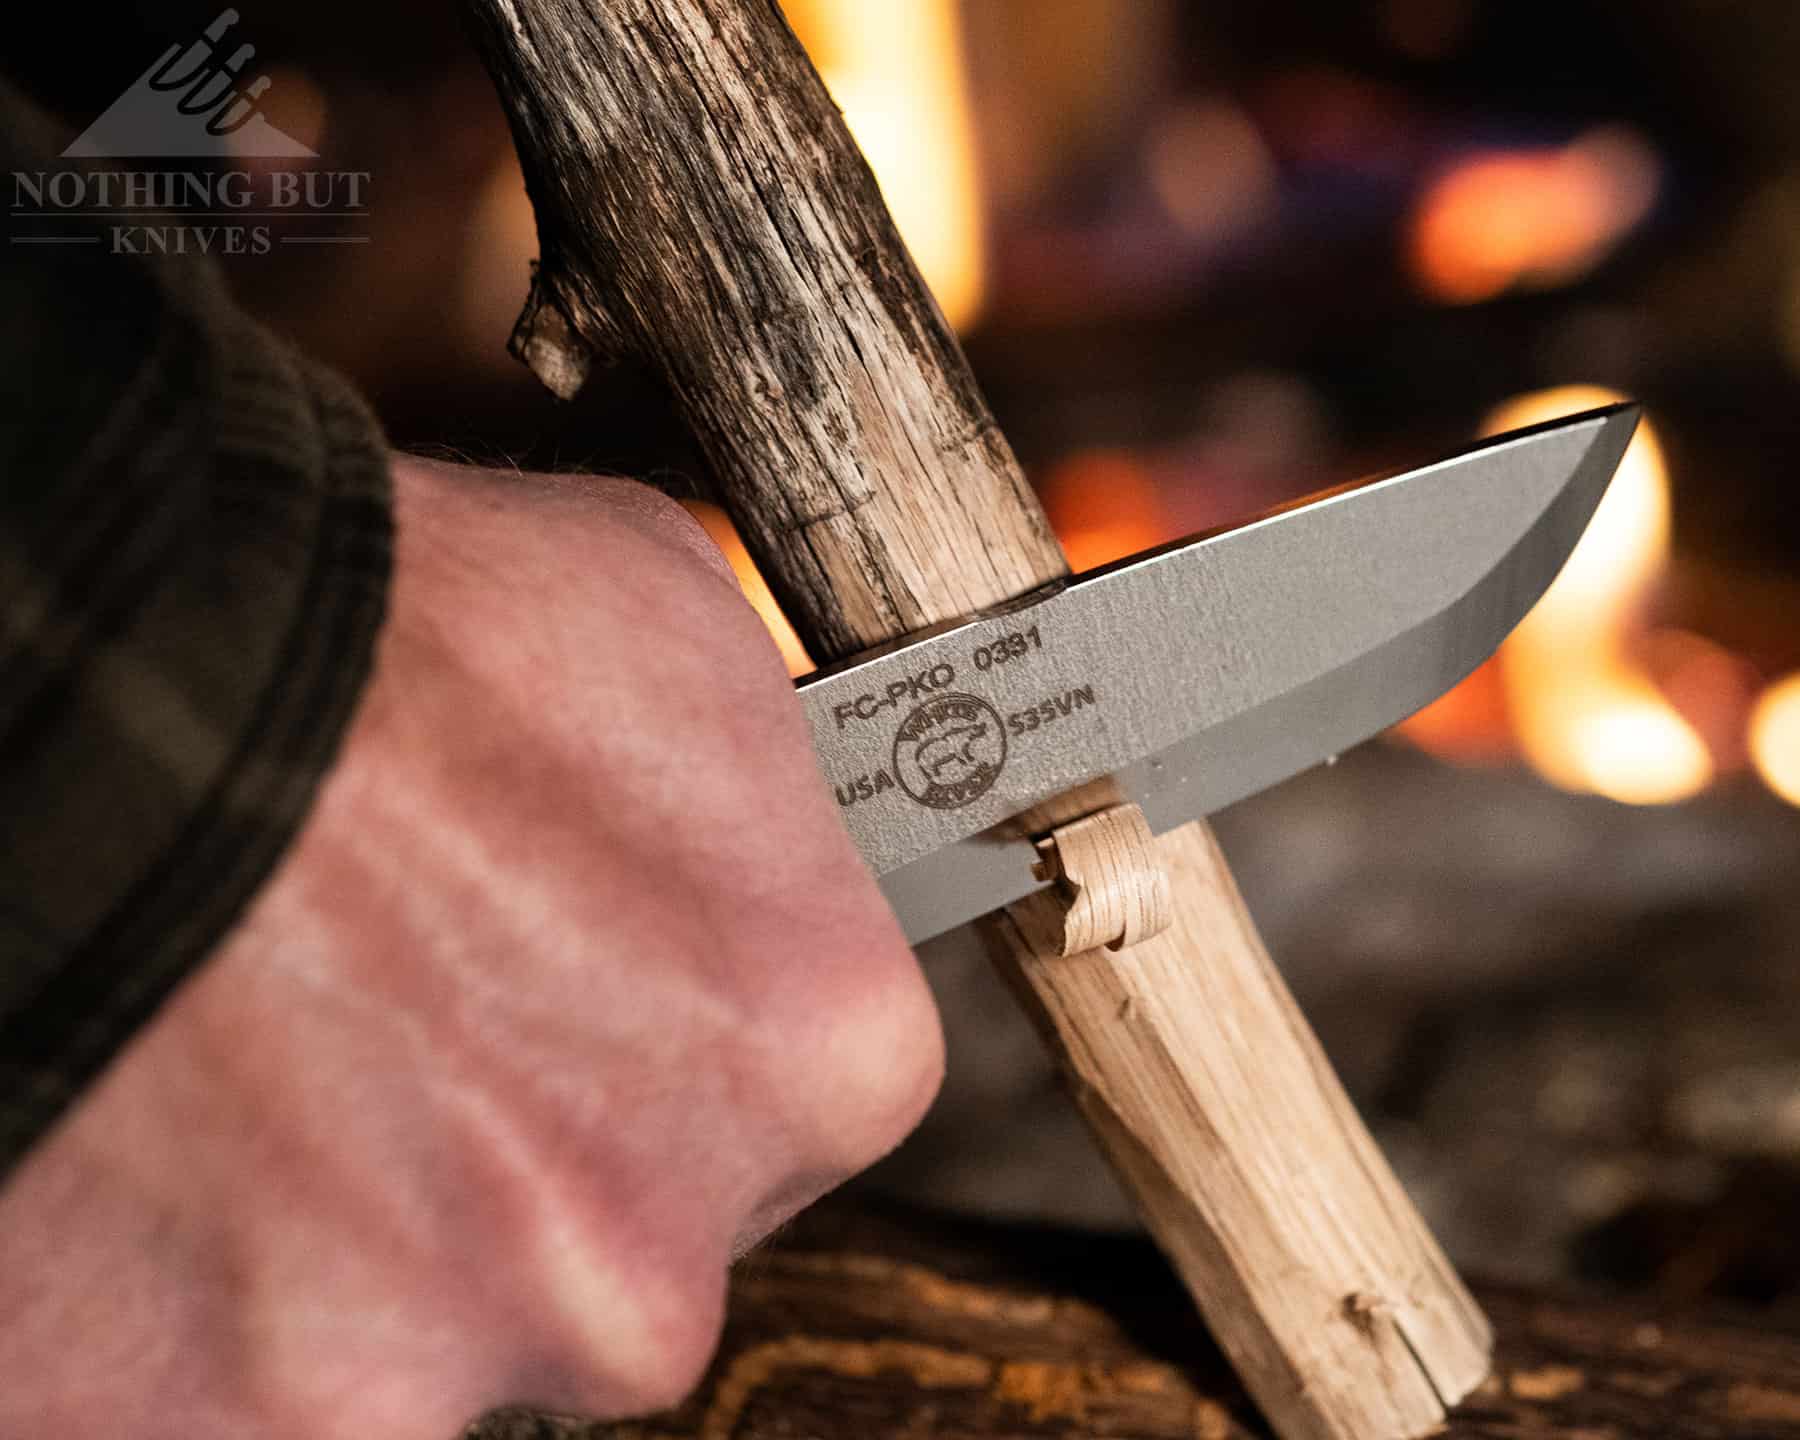 https://www.nothingbutknives.com/wp-content/uploads/2023/03/Carving-With-the-Firecraft-Puukko.jpg